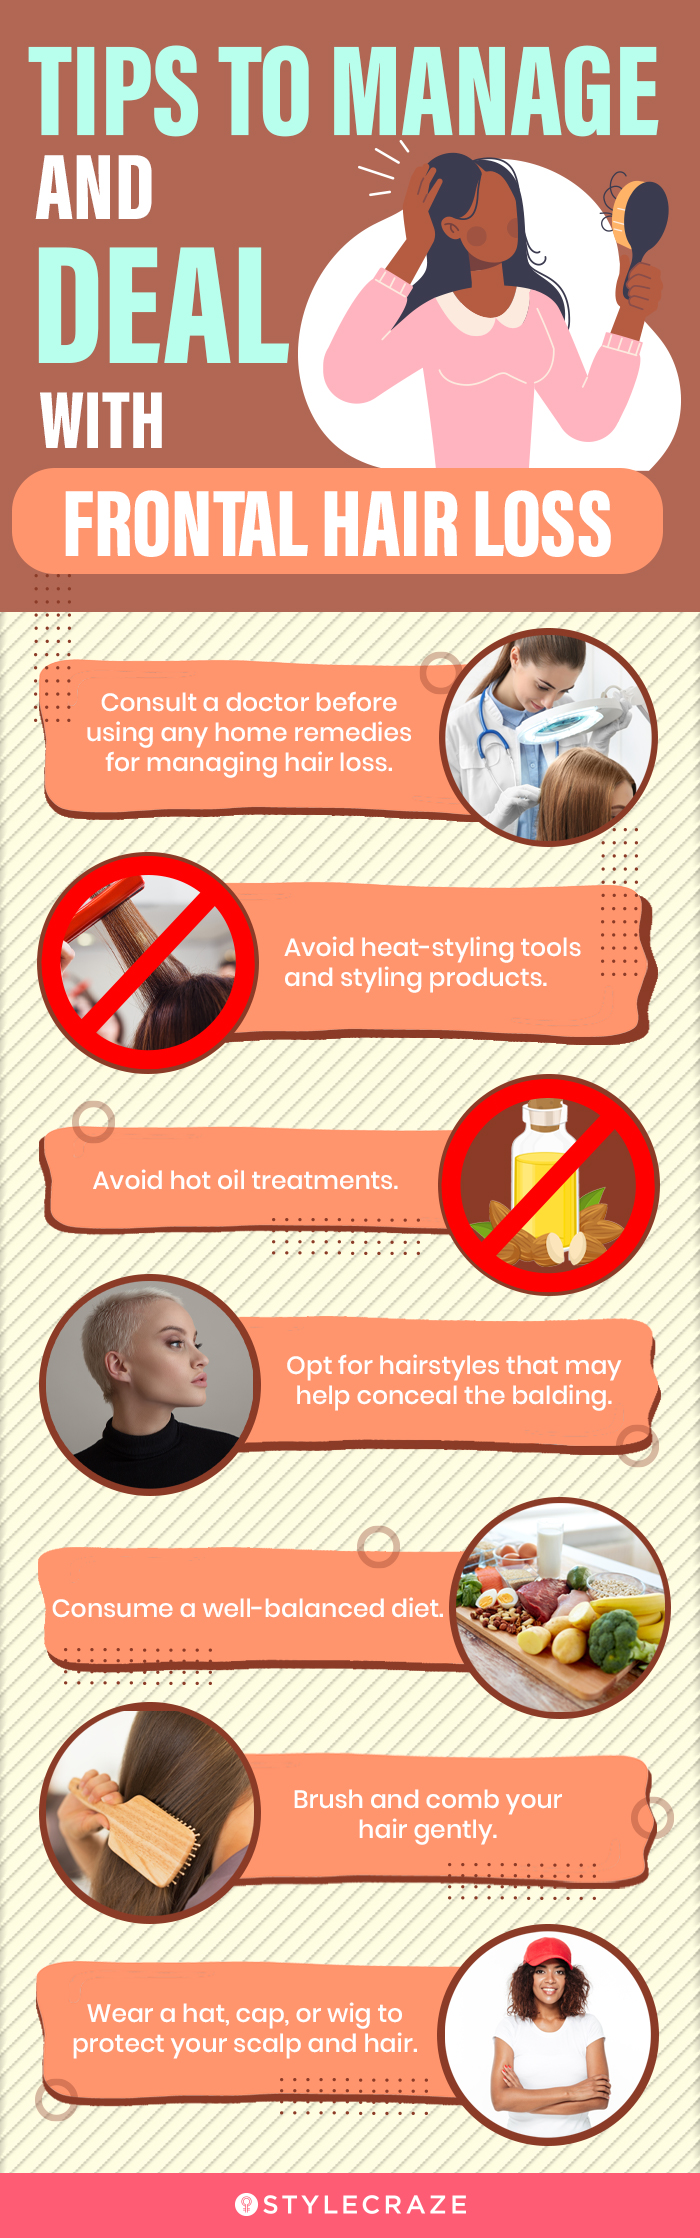 tips to manage and deal with frontal hair loss [infographic]